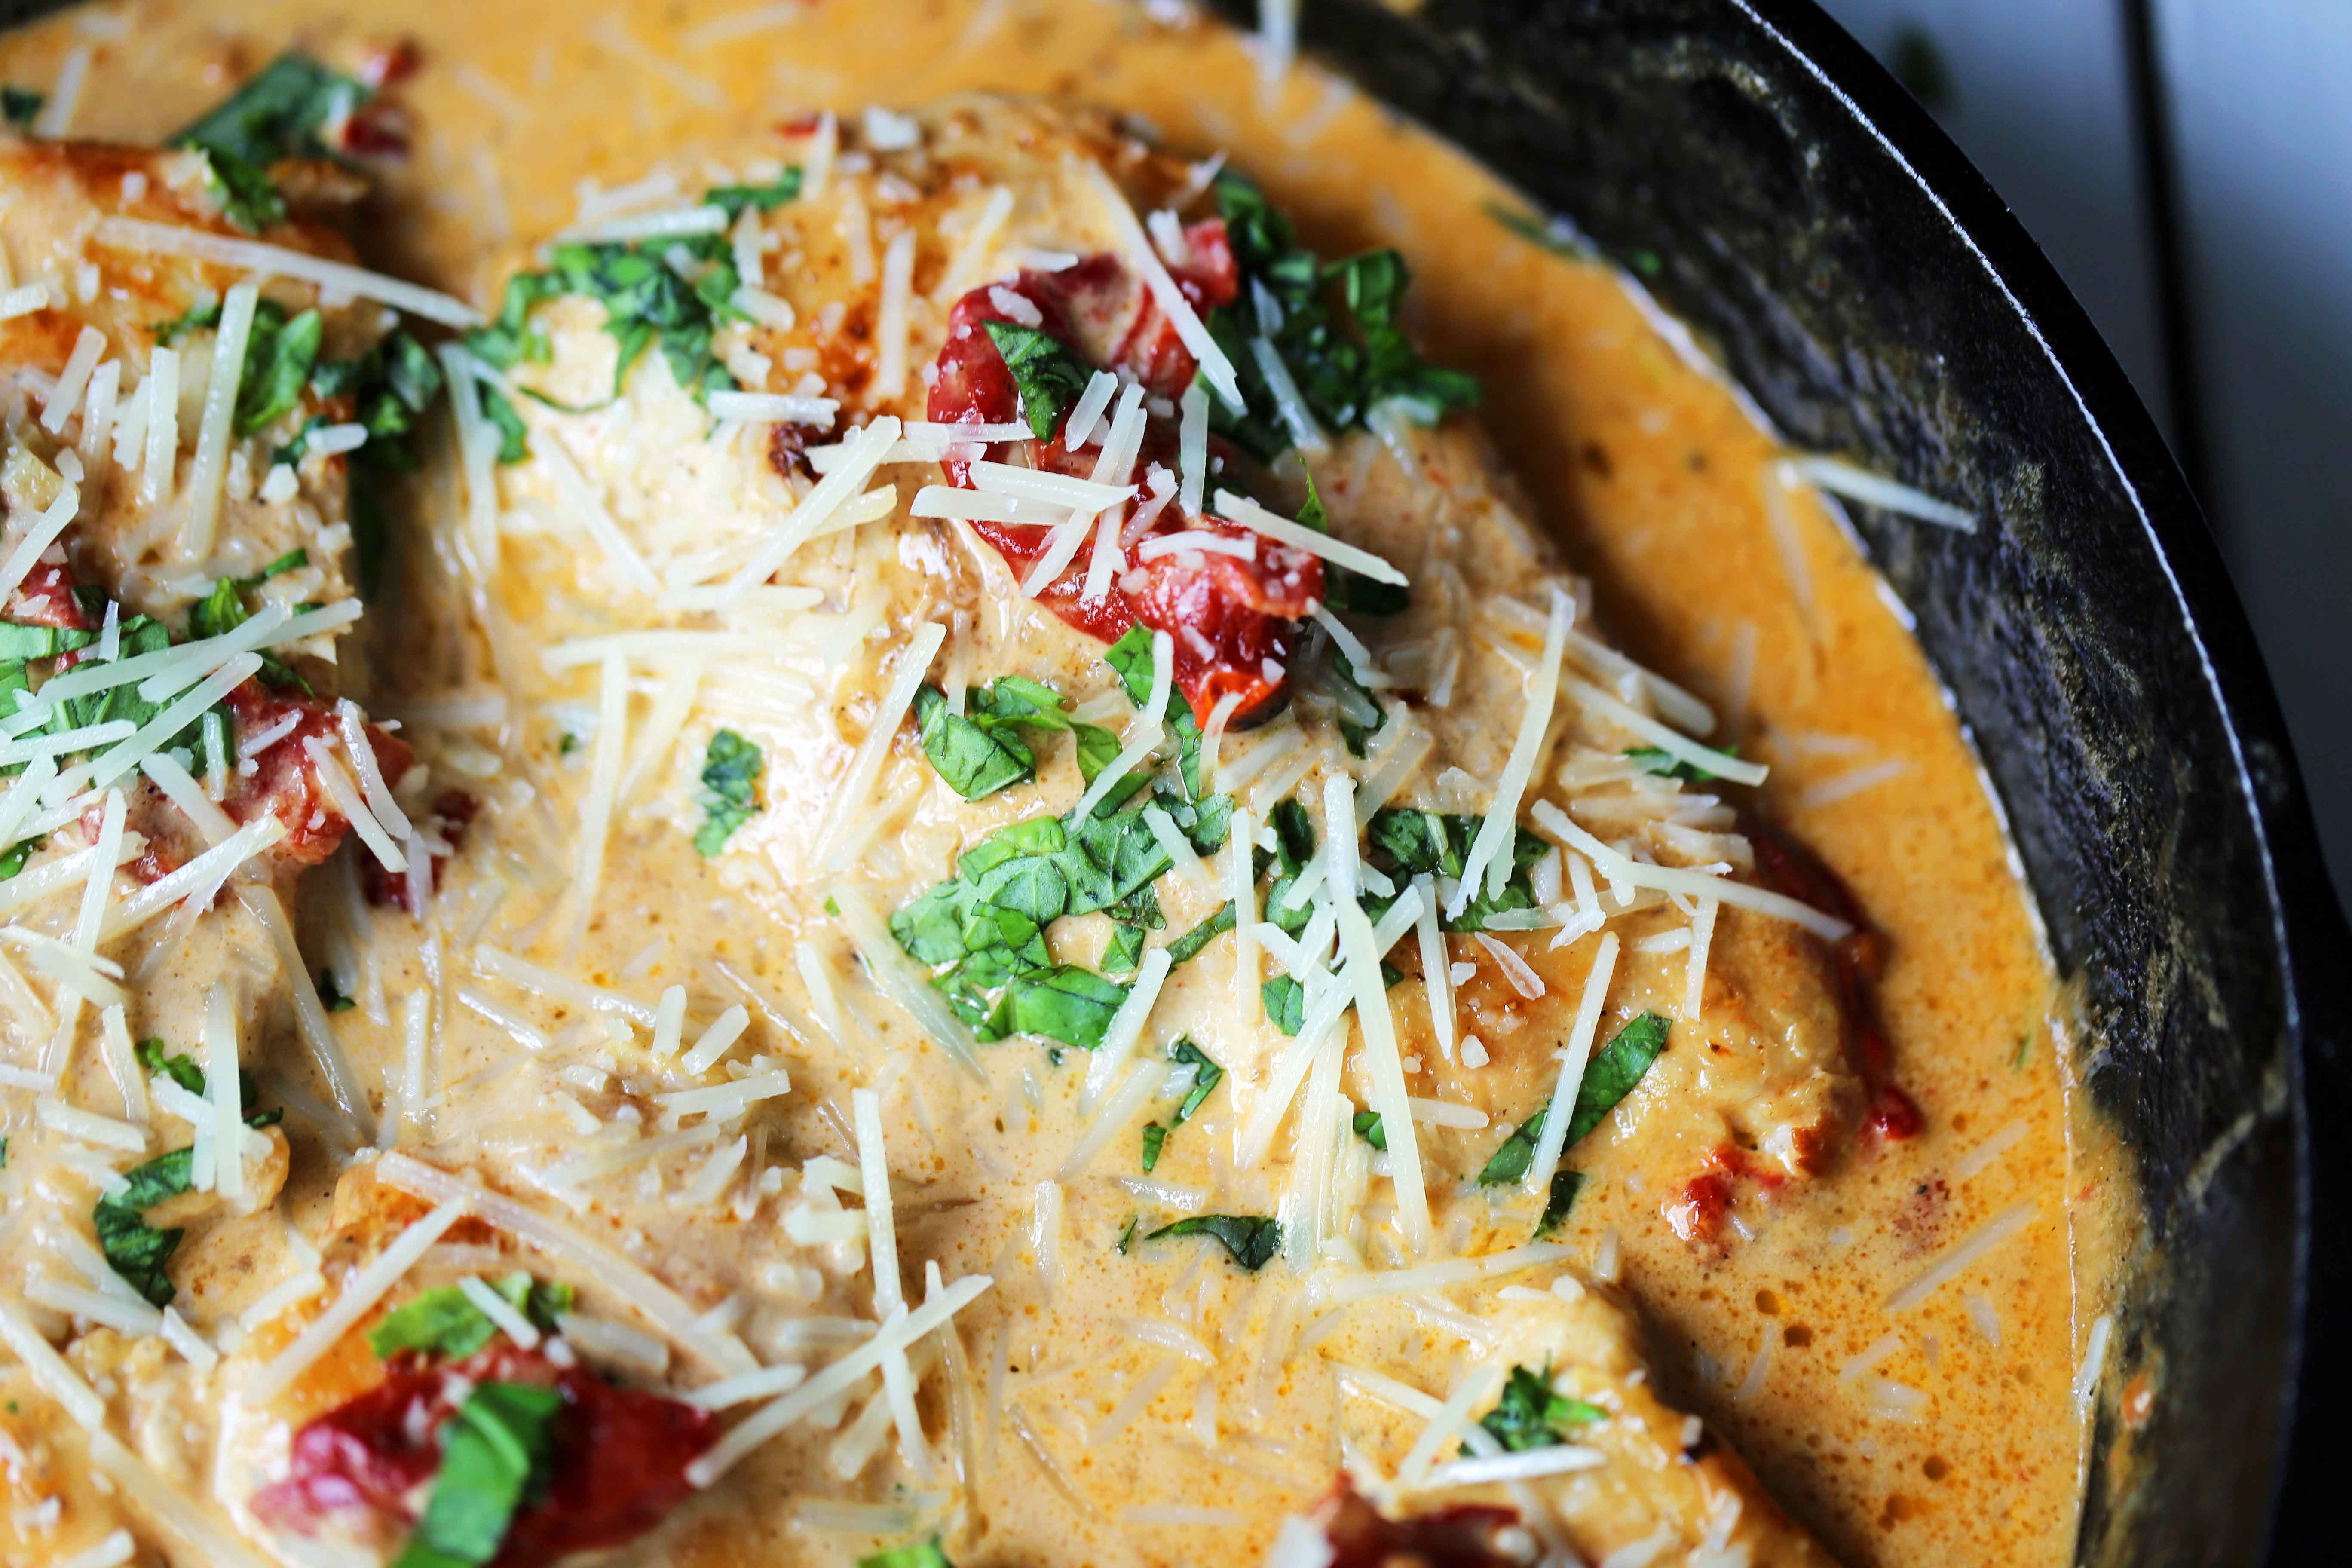 Skillet Chicken with Sun-Dried Tomato Cream Sauce. 20-Minute Chicken made with garlic butter sun-dried tomato parmesan cheese cream sauce. The most flavorful chicken and sauce! You will want to drink the sauce...its THAT GOOD! www.modernhoney.com